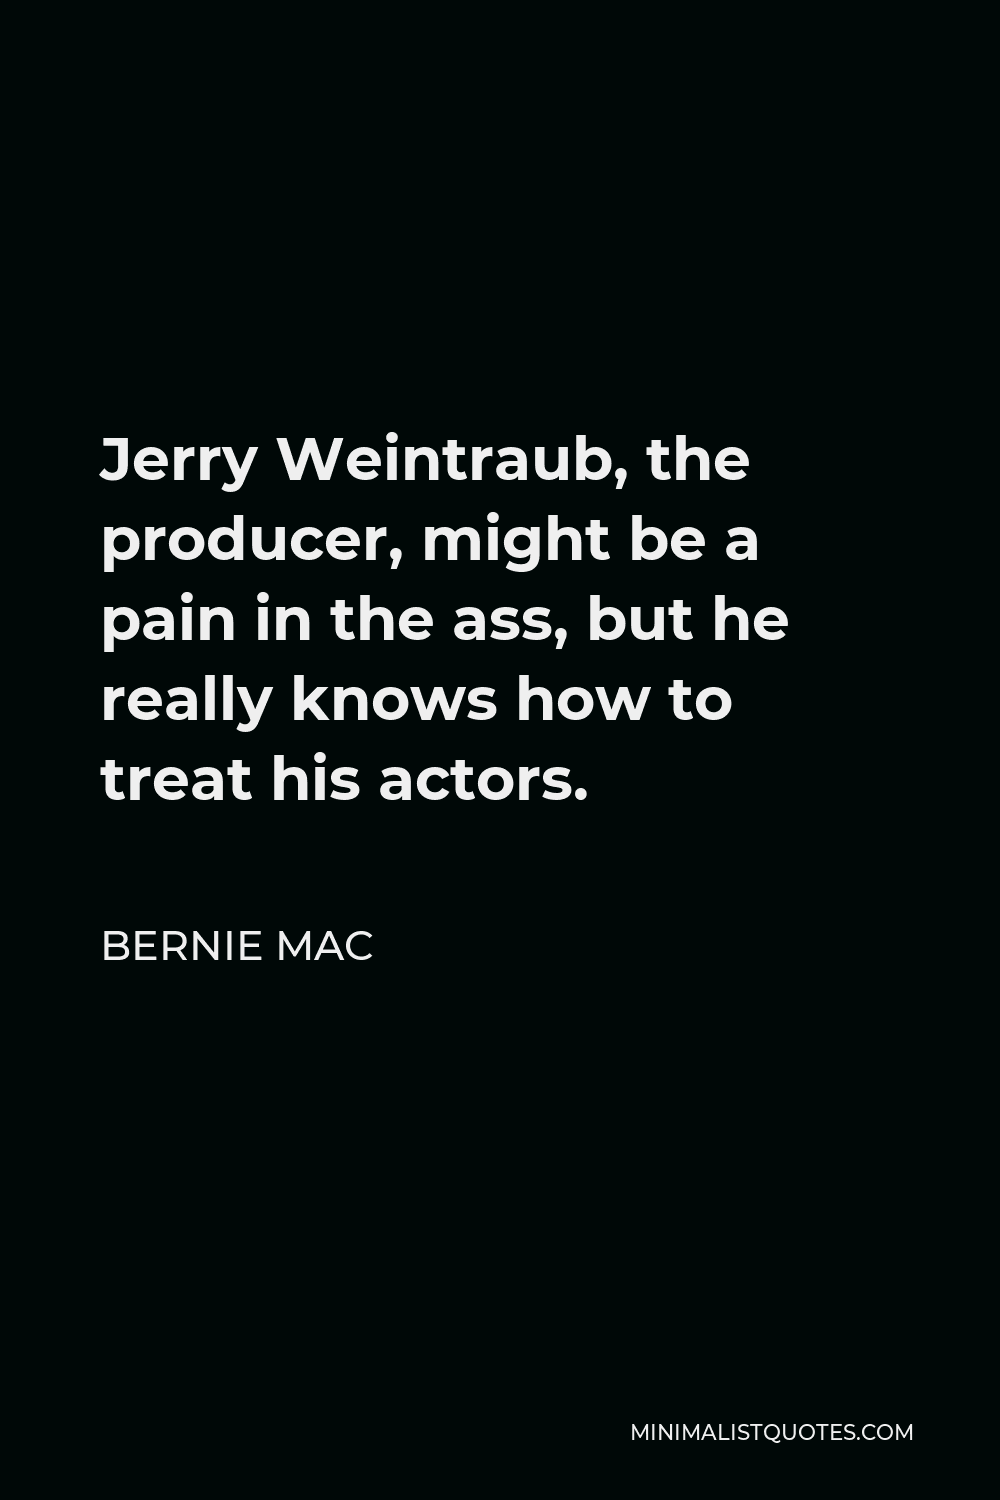 Bernie Mac Quote - Jerry Weintraub, the producer, might be a pain in the ass, but he really knows how to treat his actors.